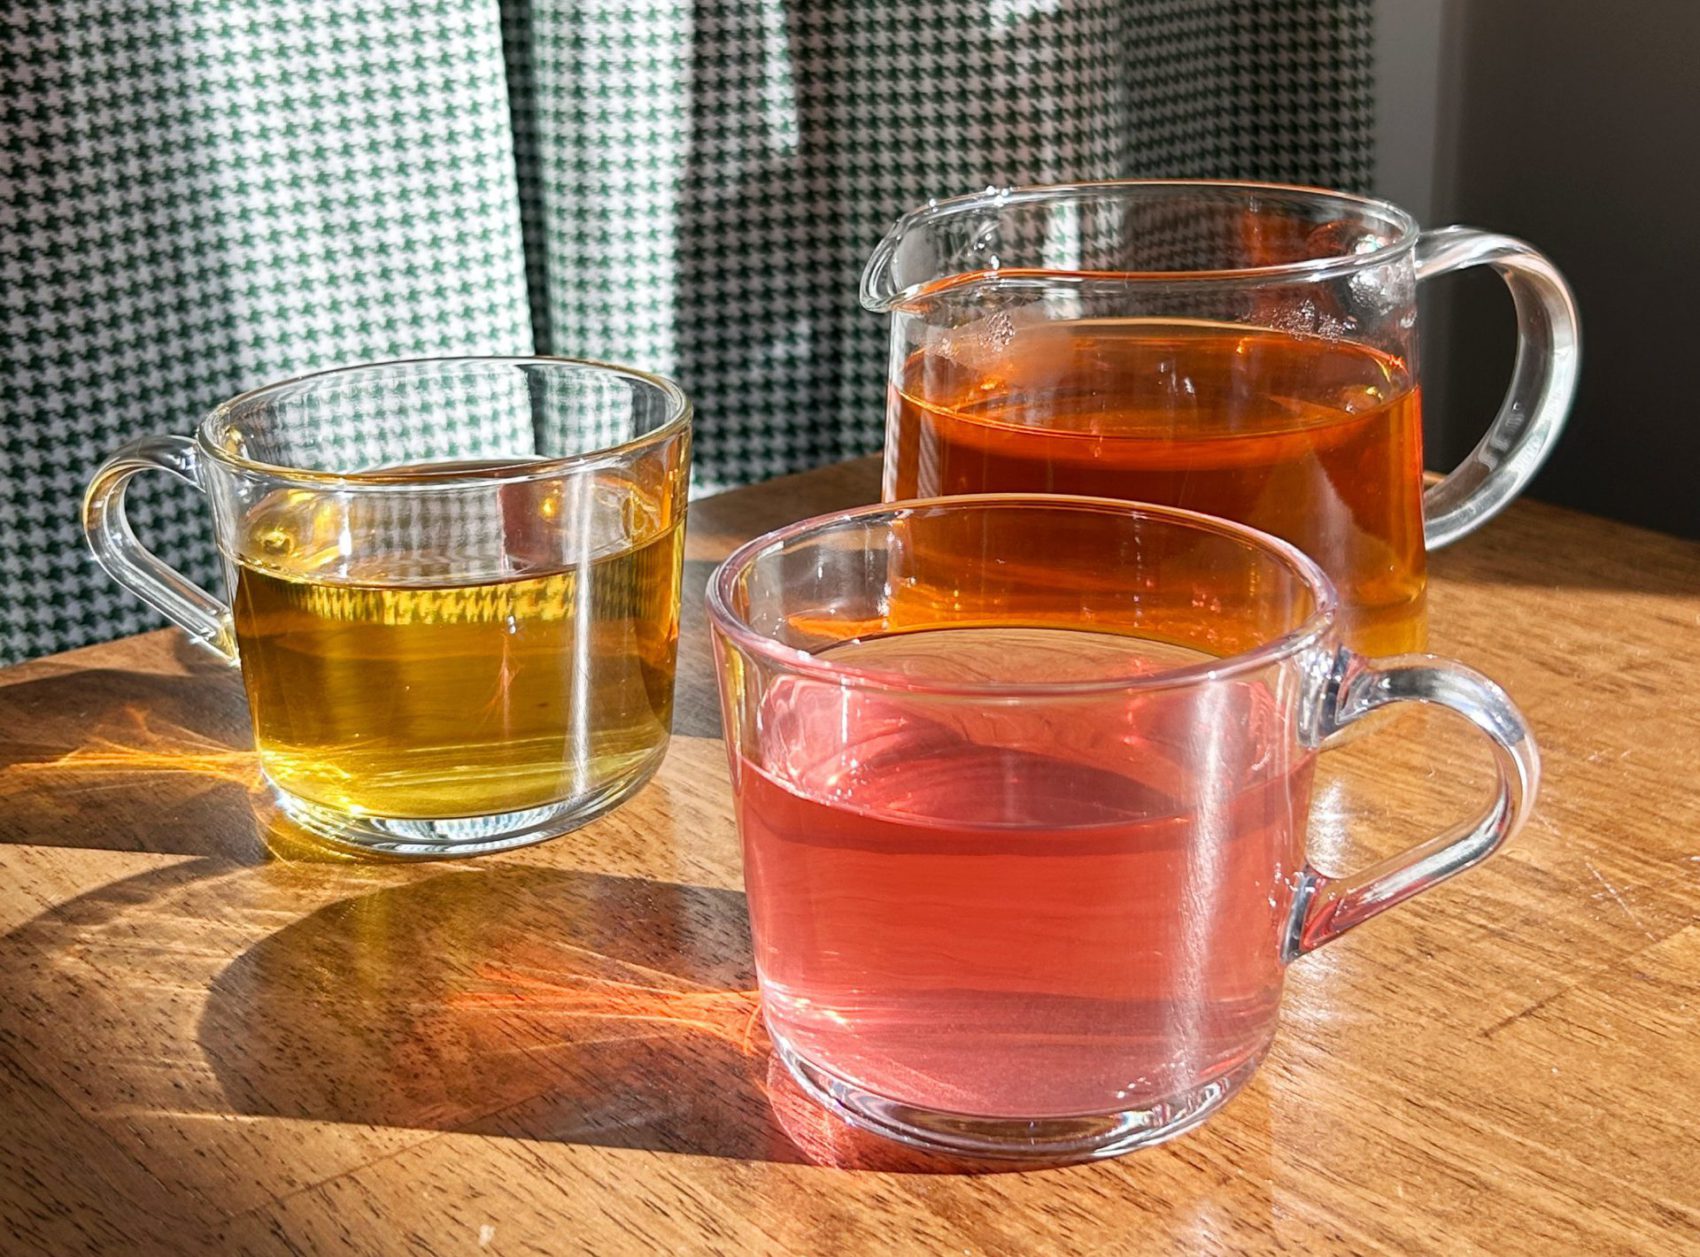 Colourful tea sits upon a wooden table in clear mugs. They are auburn, Golden, and Pink tea blends. Light shines through illuminating the vibrancy of the tea and casts light shadows. Teddy's Tea Club.